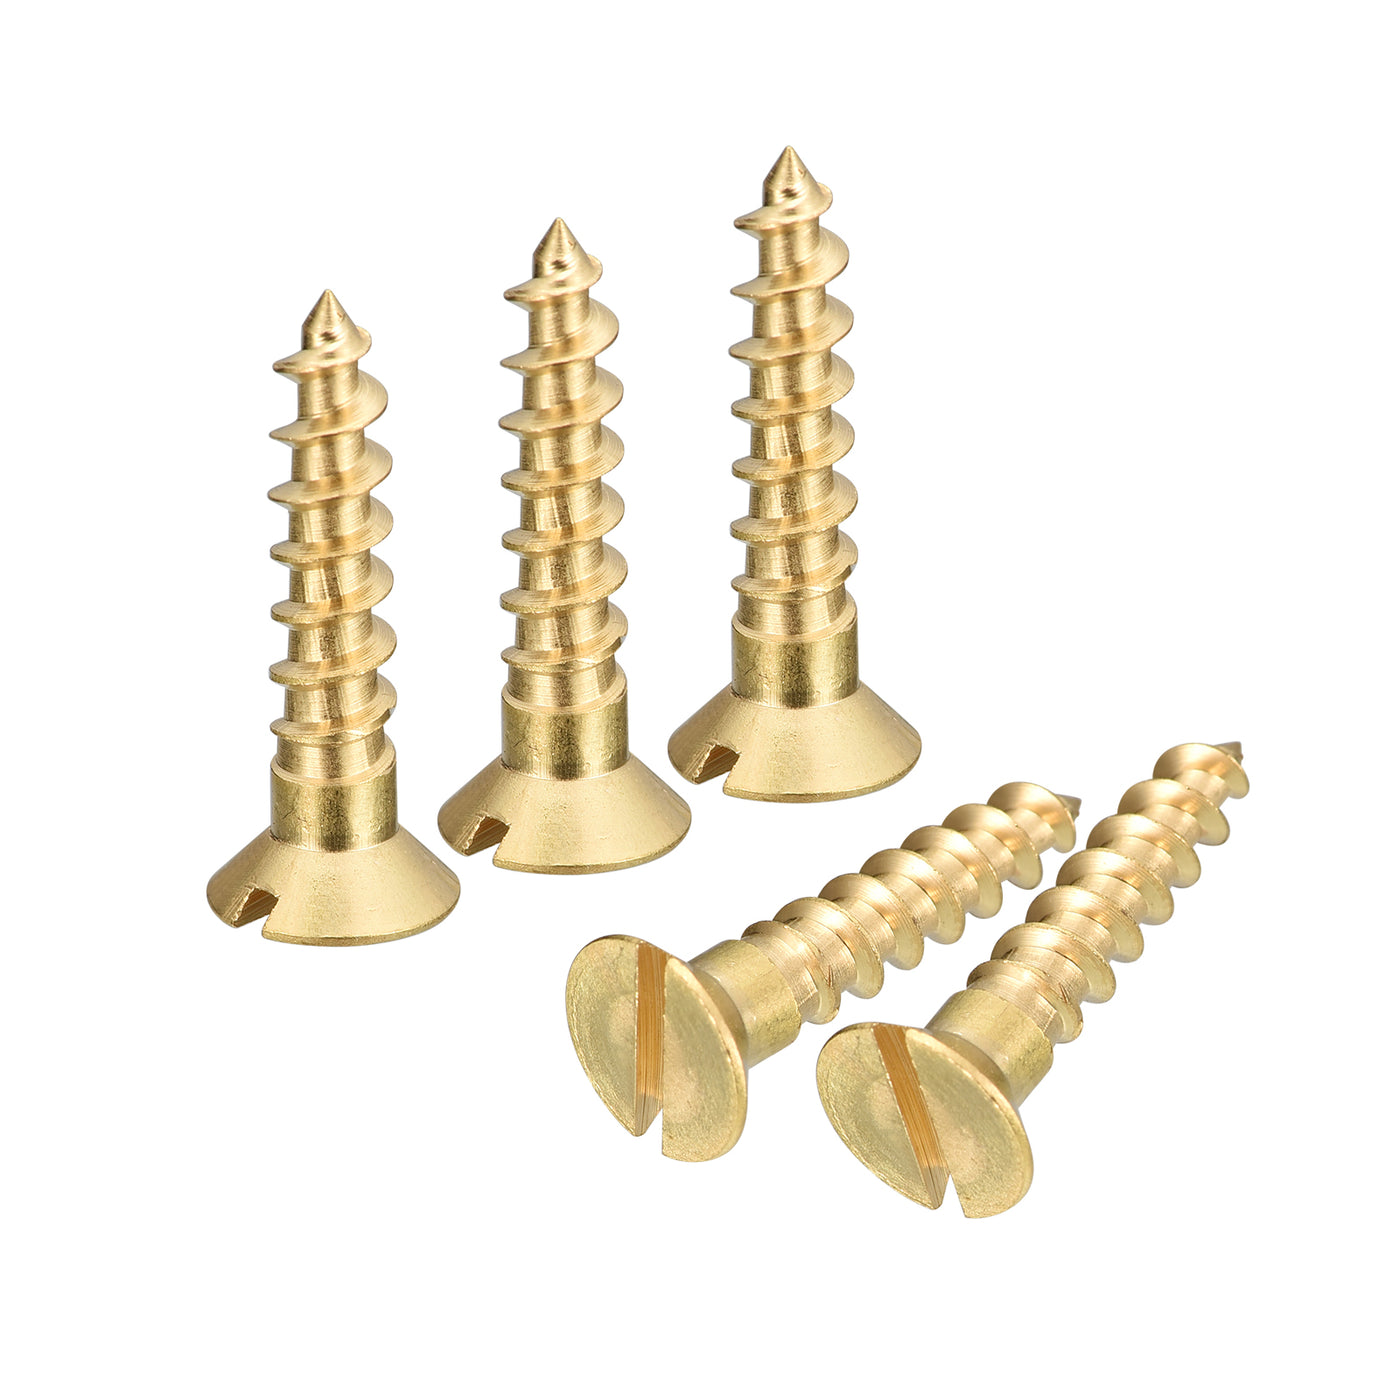 uxcell Uxcell 50Pcs M5 x 25mm Brass Slotted Drive Flat Head Wood Screws Self Tapping Screw